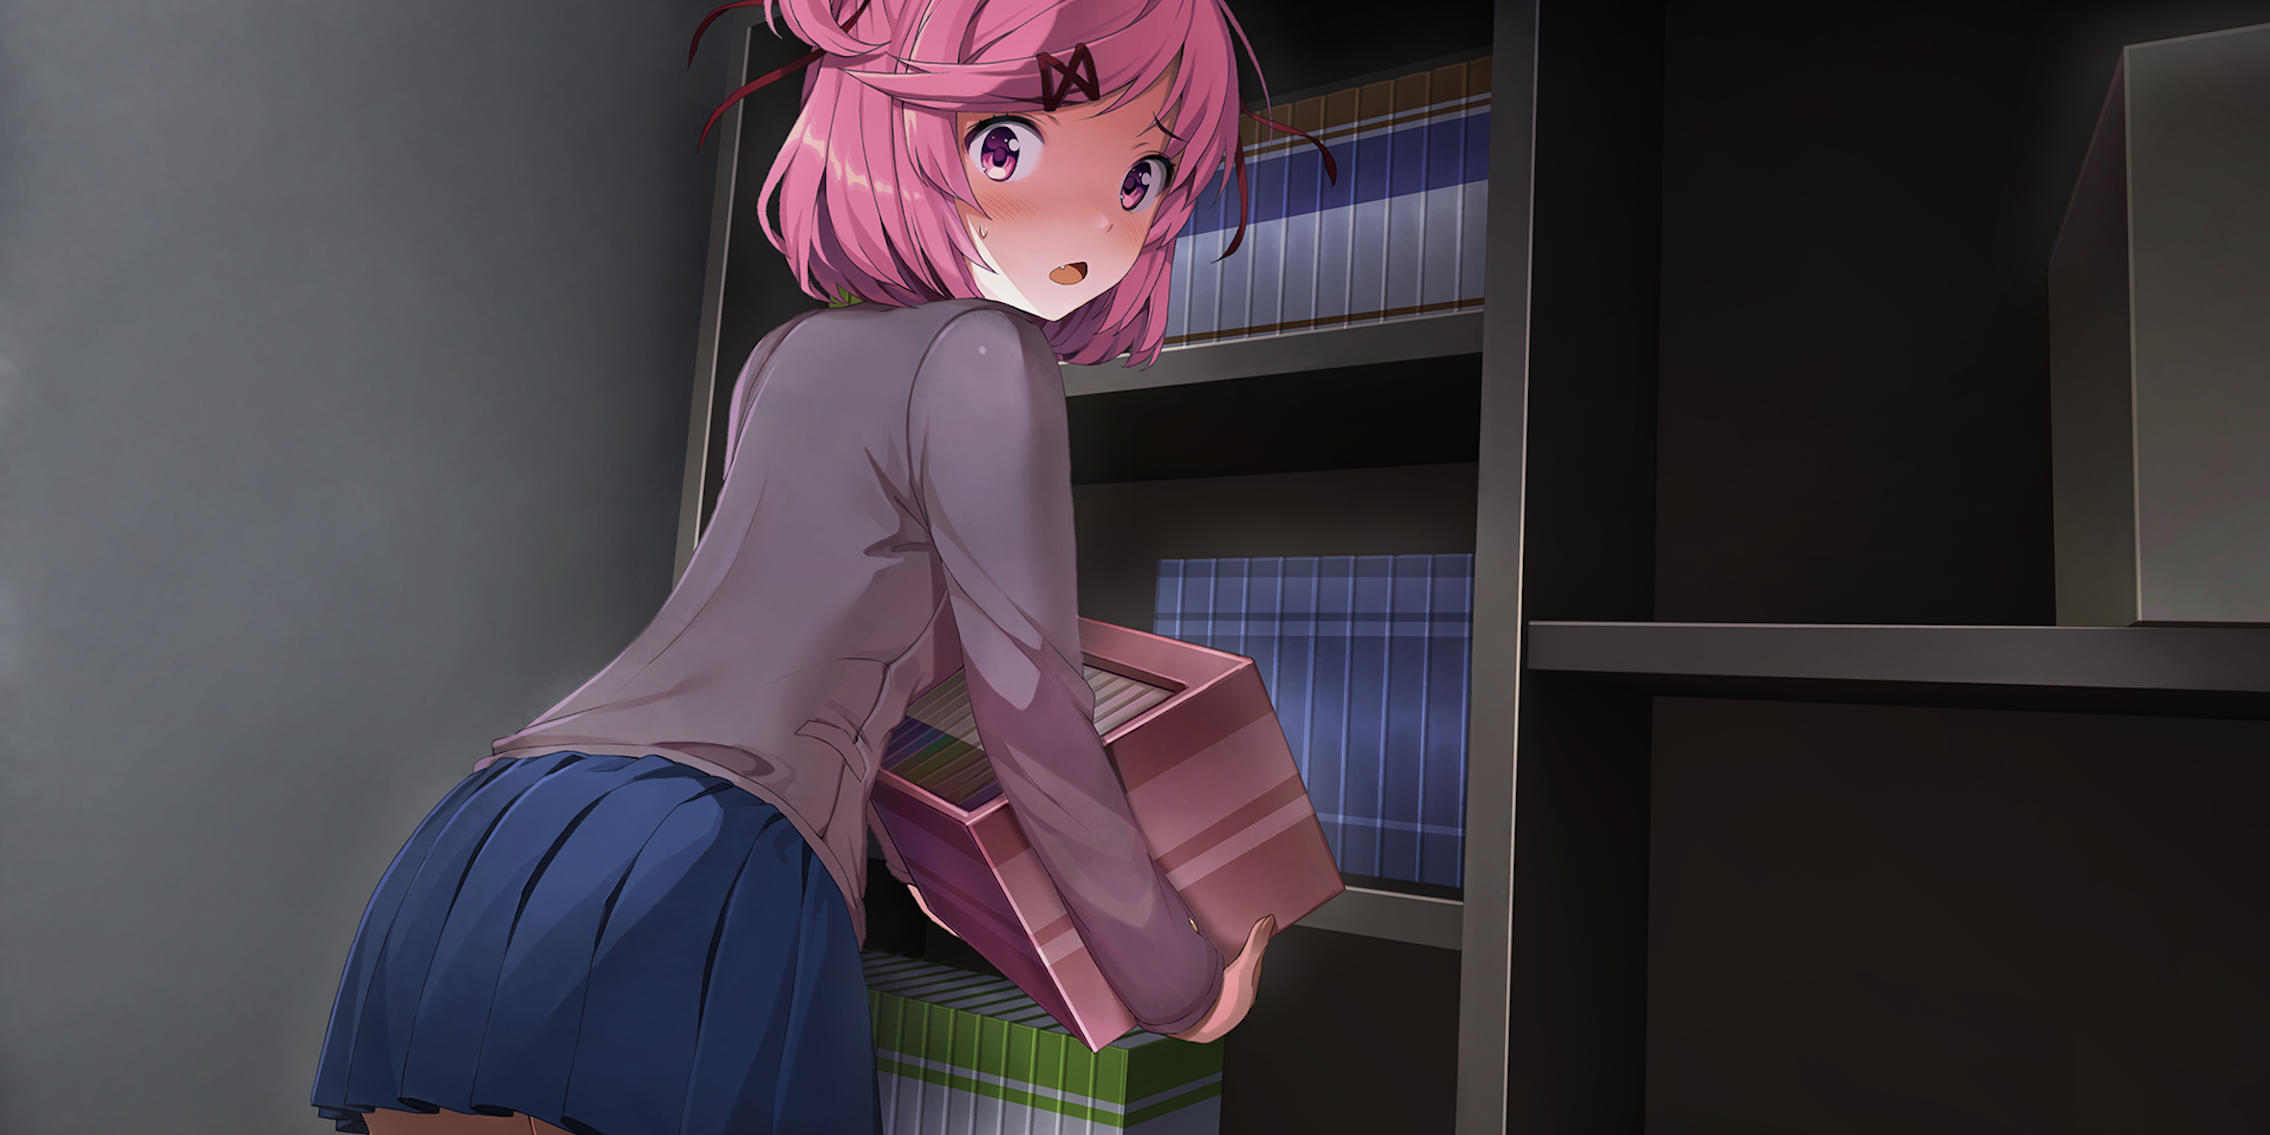 Natsuki from Doki Doki Literature Club is at the center of a transphobic meme.